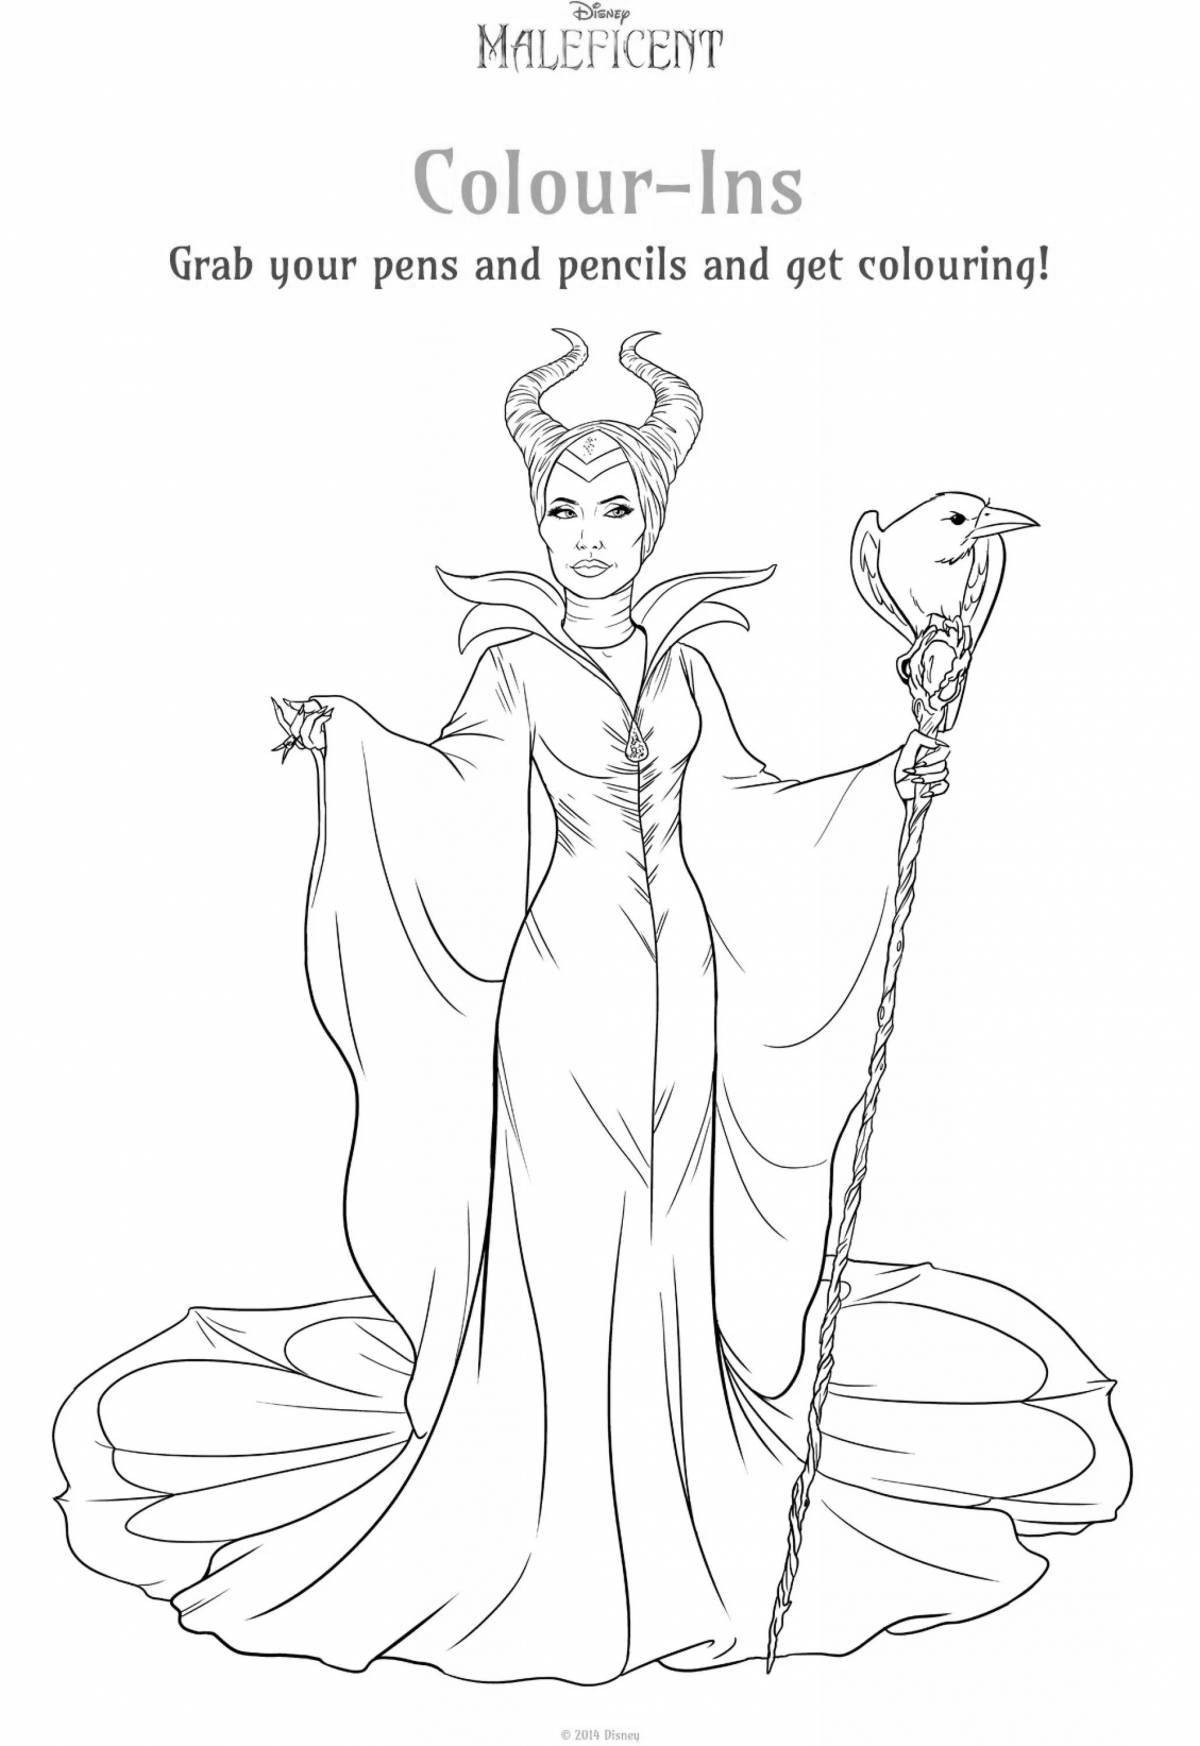 Adorable maleficent coloring book for kids